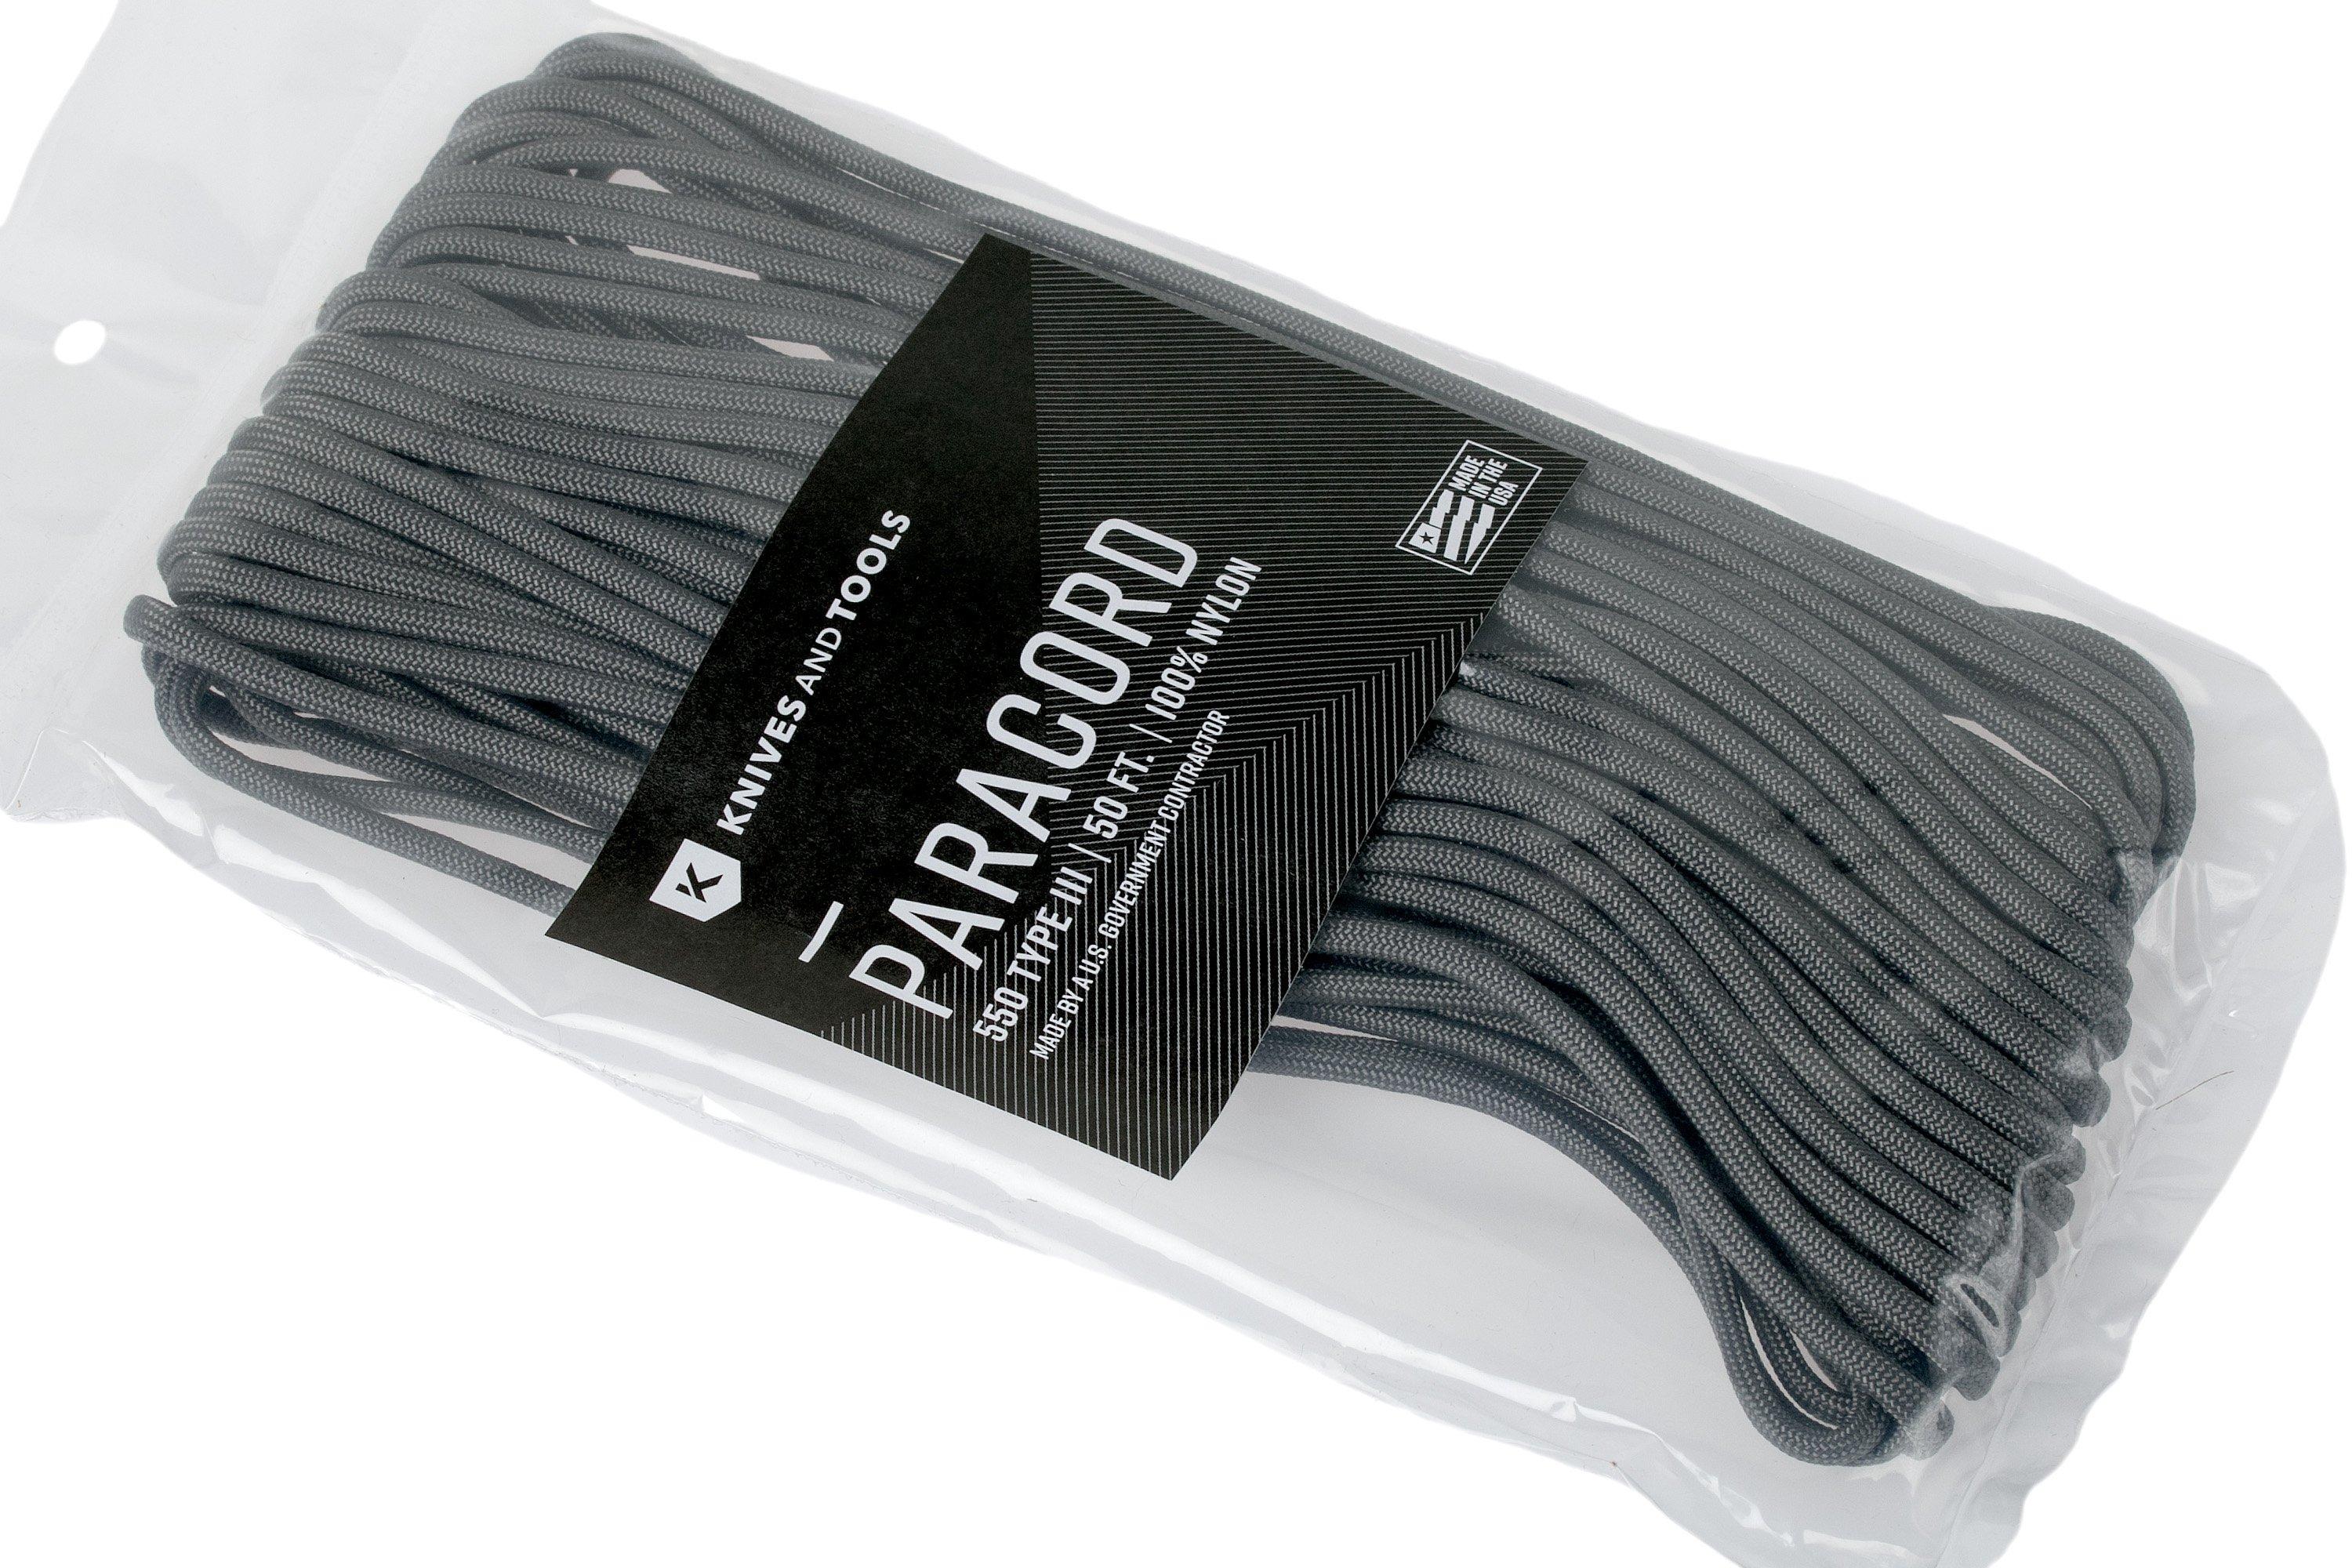 Knivesandtools 550 paracord type III, colour: charcoal grey, 50 ft